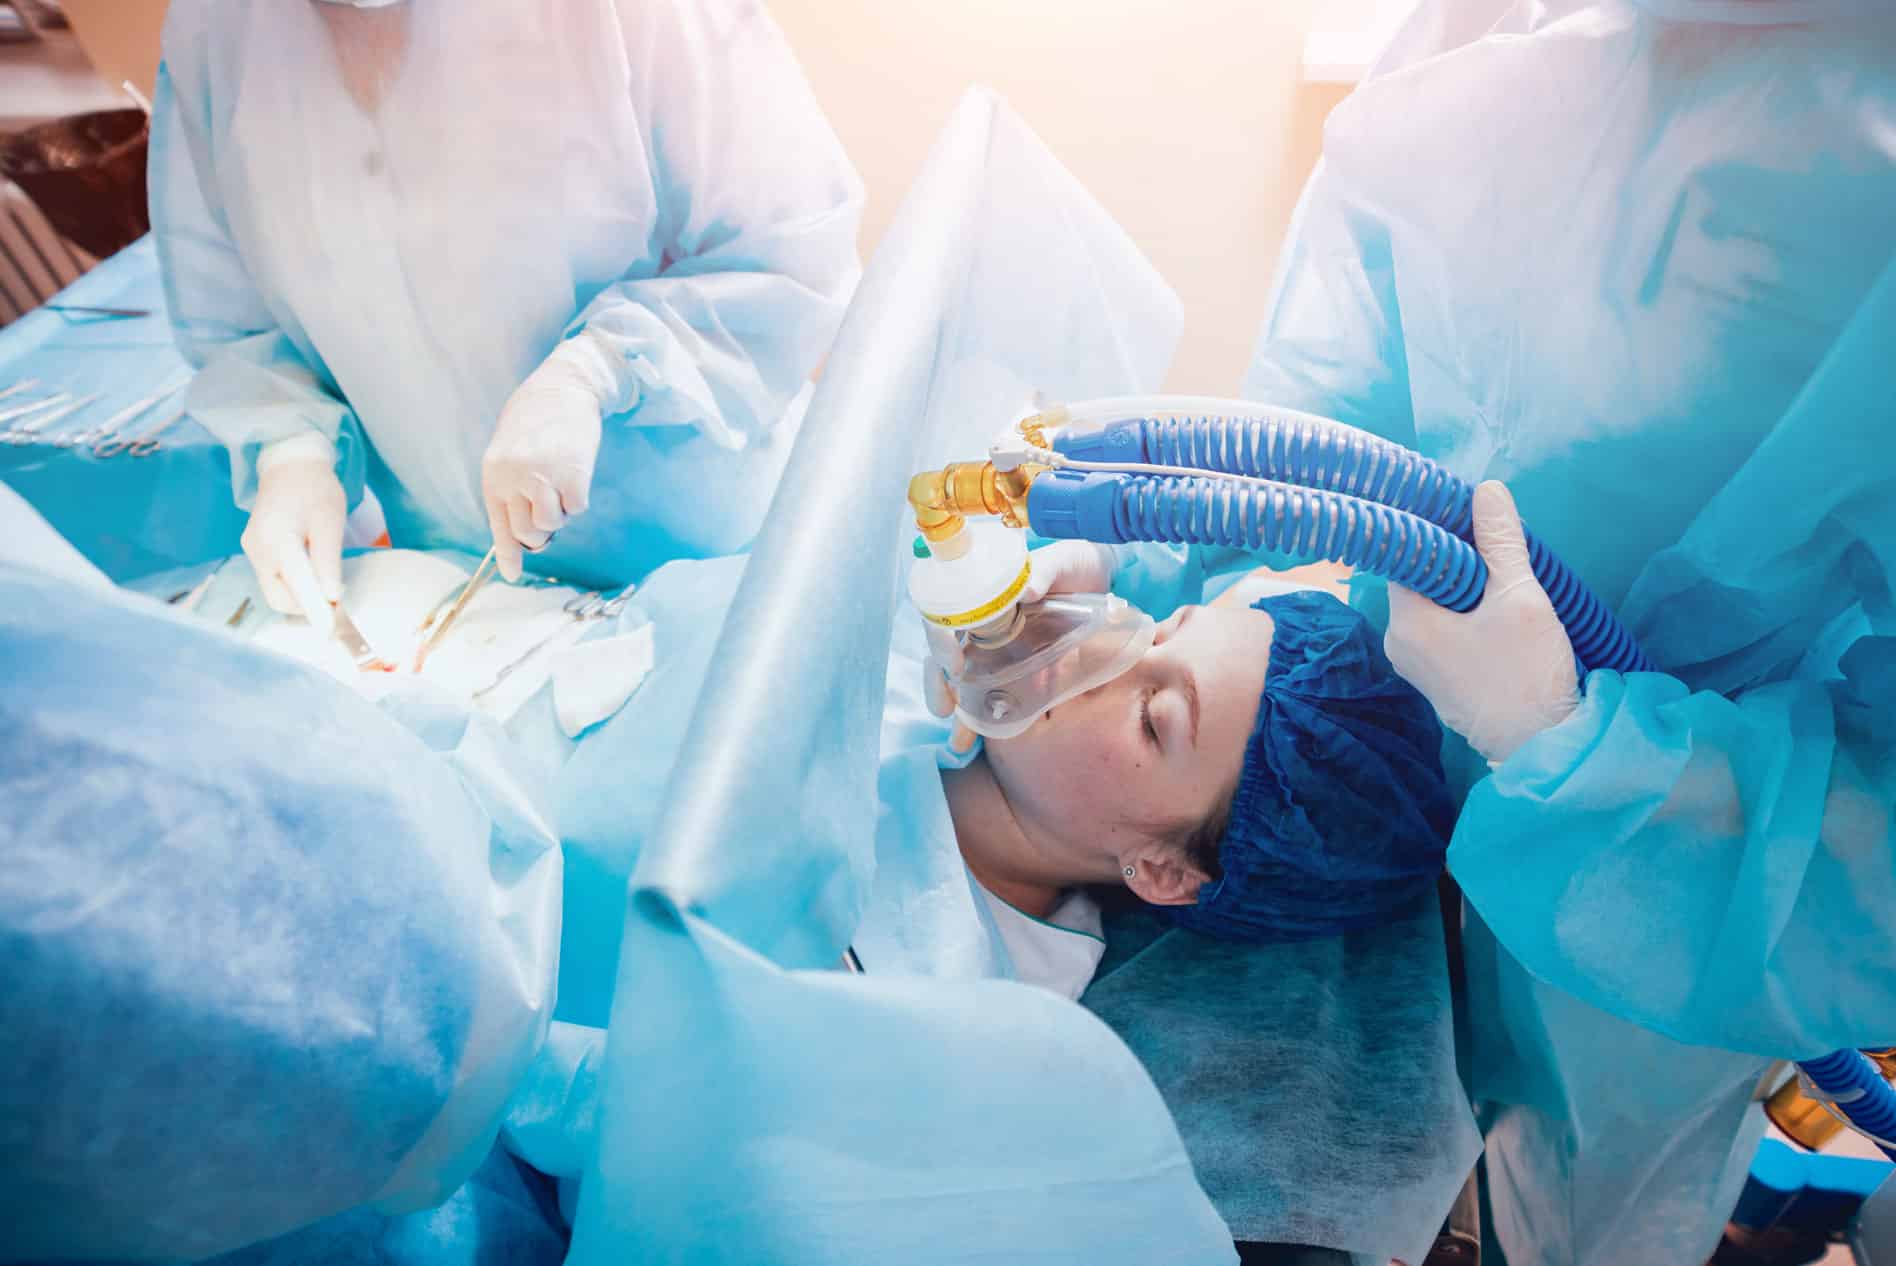 What You Need to Know About Anesthesia for Spine Surgery